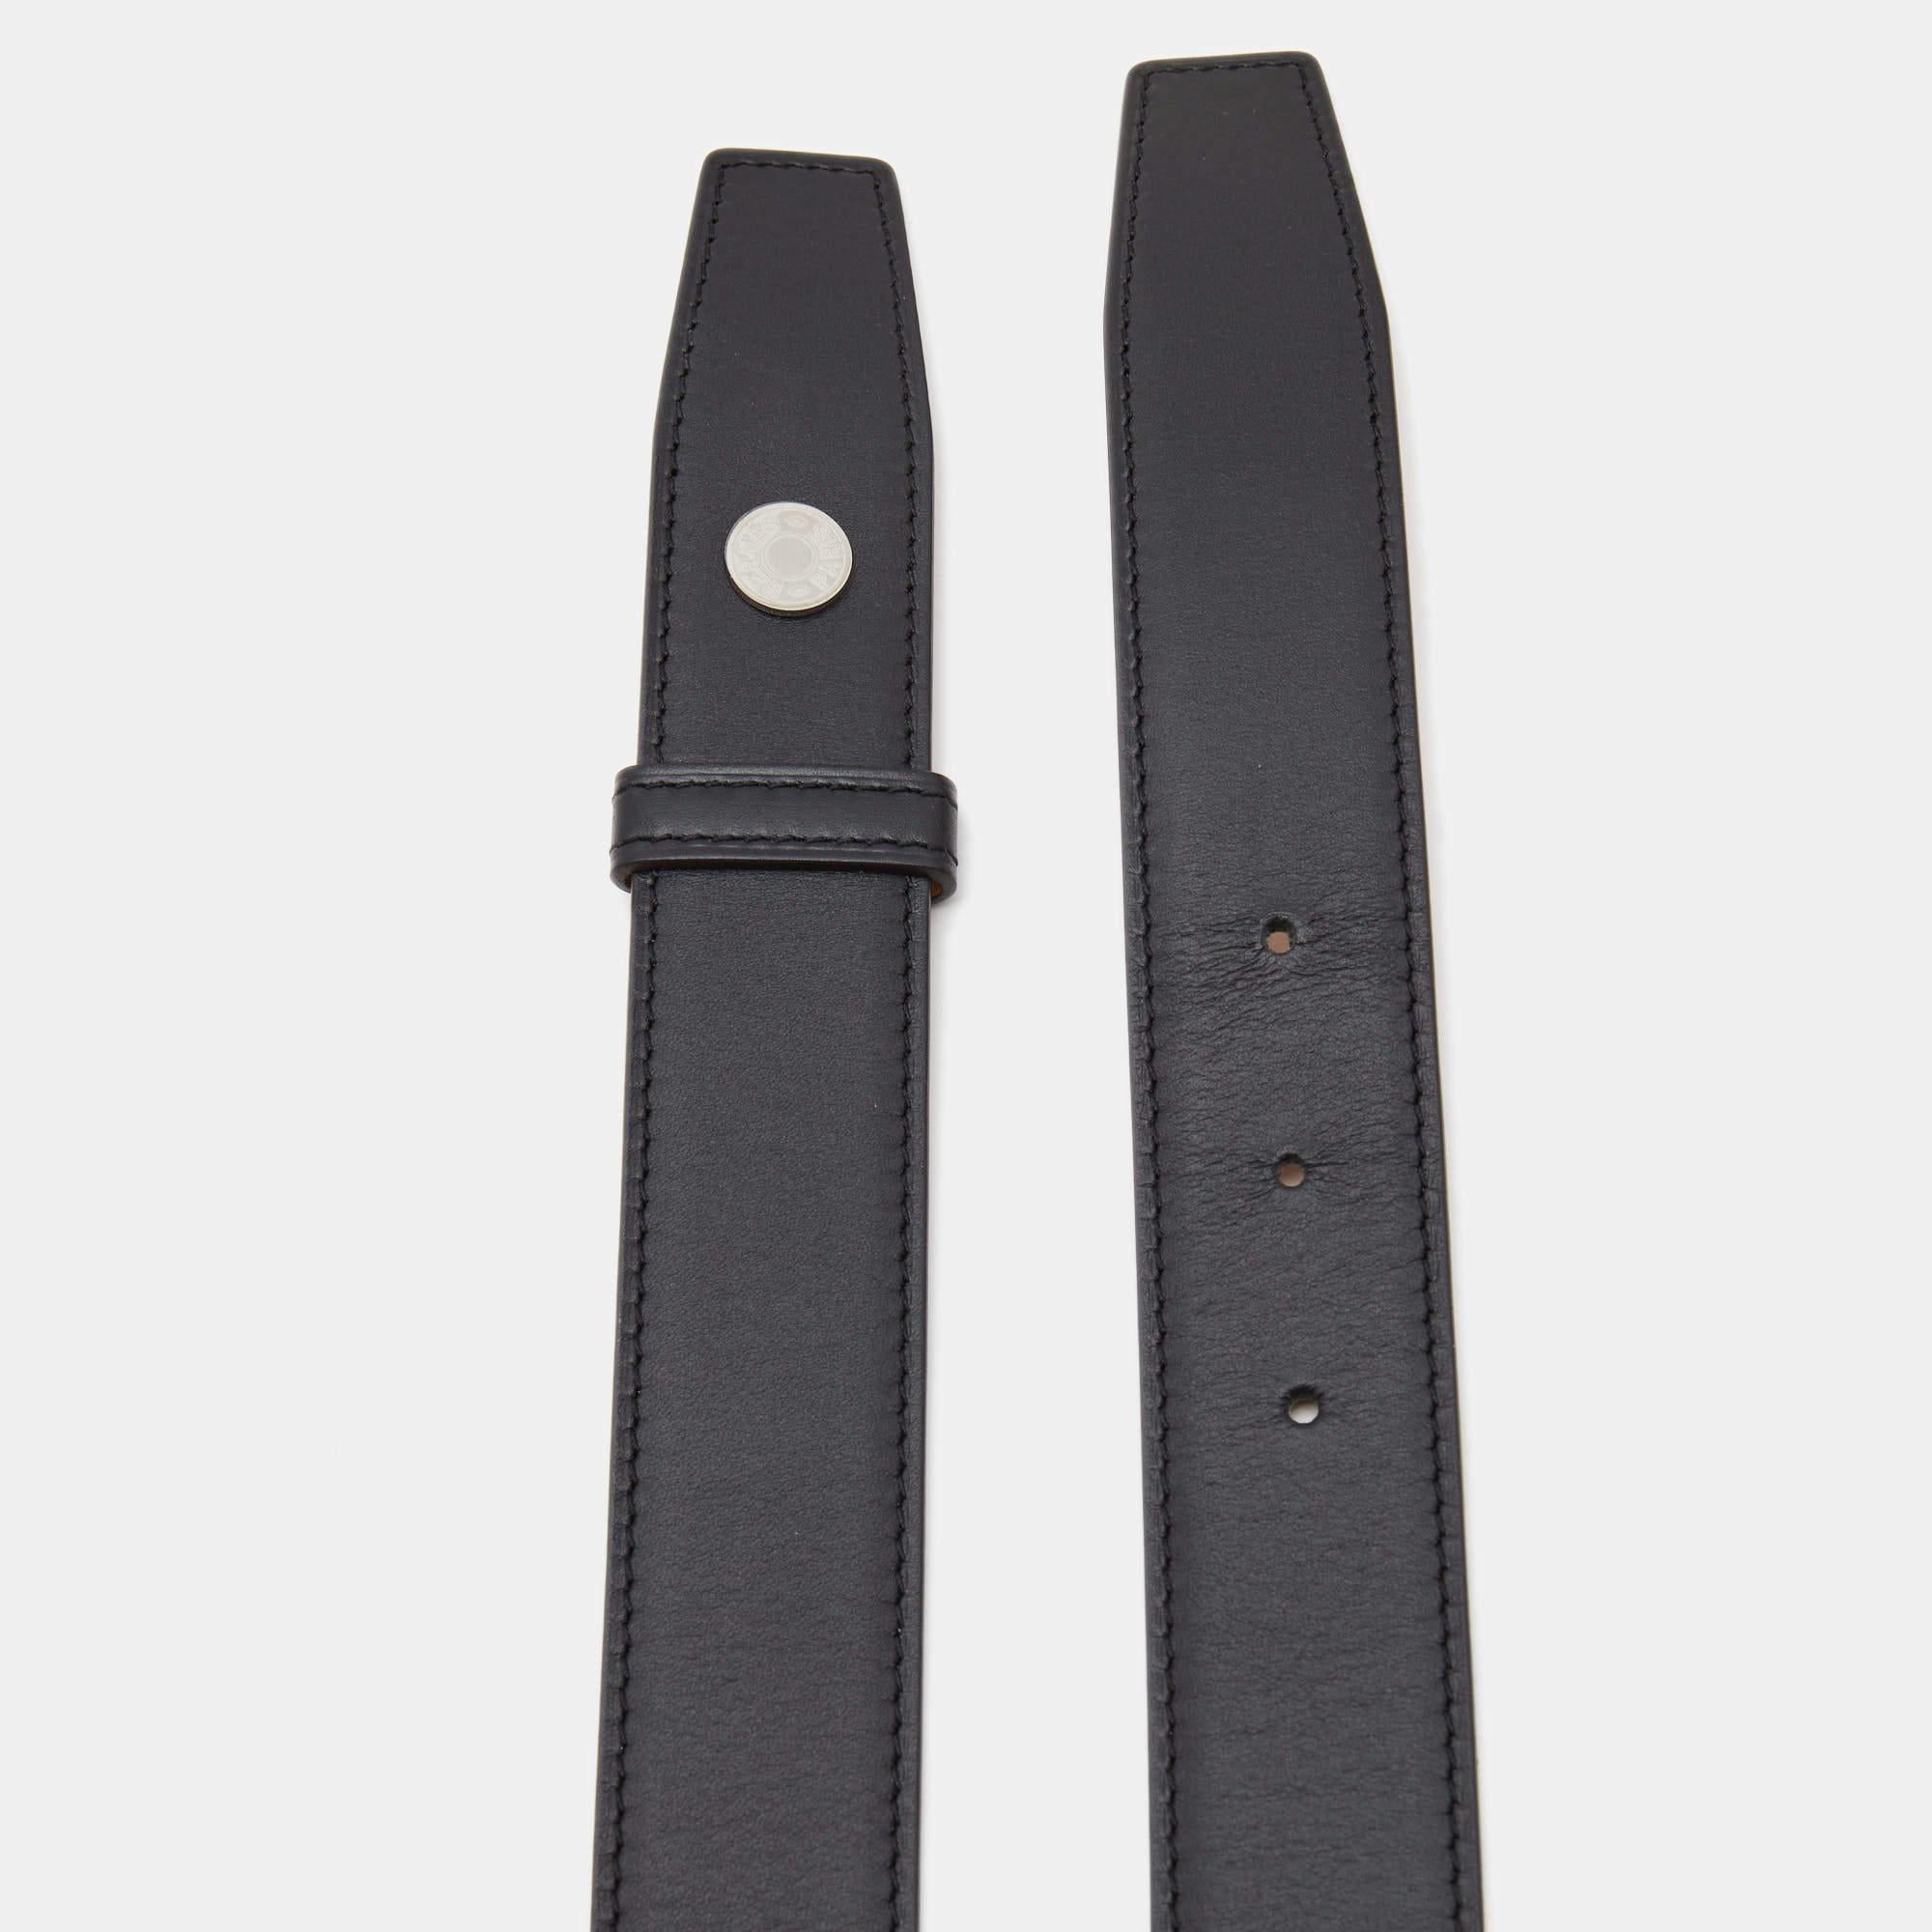 The classic and one of the iconic styles from the house of Hermes is their belts which give this luxurious piece a multi-utility and versatile look. Crafted from leather, this belt strap features tonal stitching around the edges along with